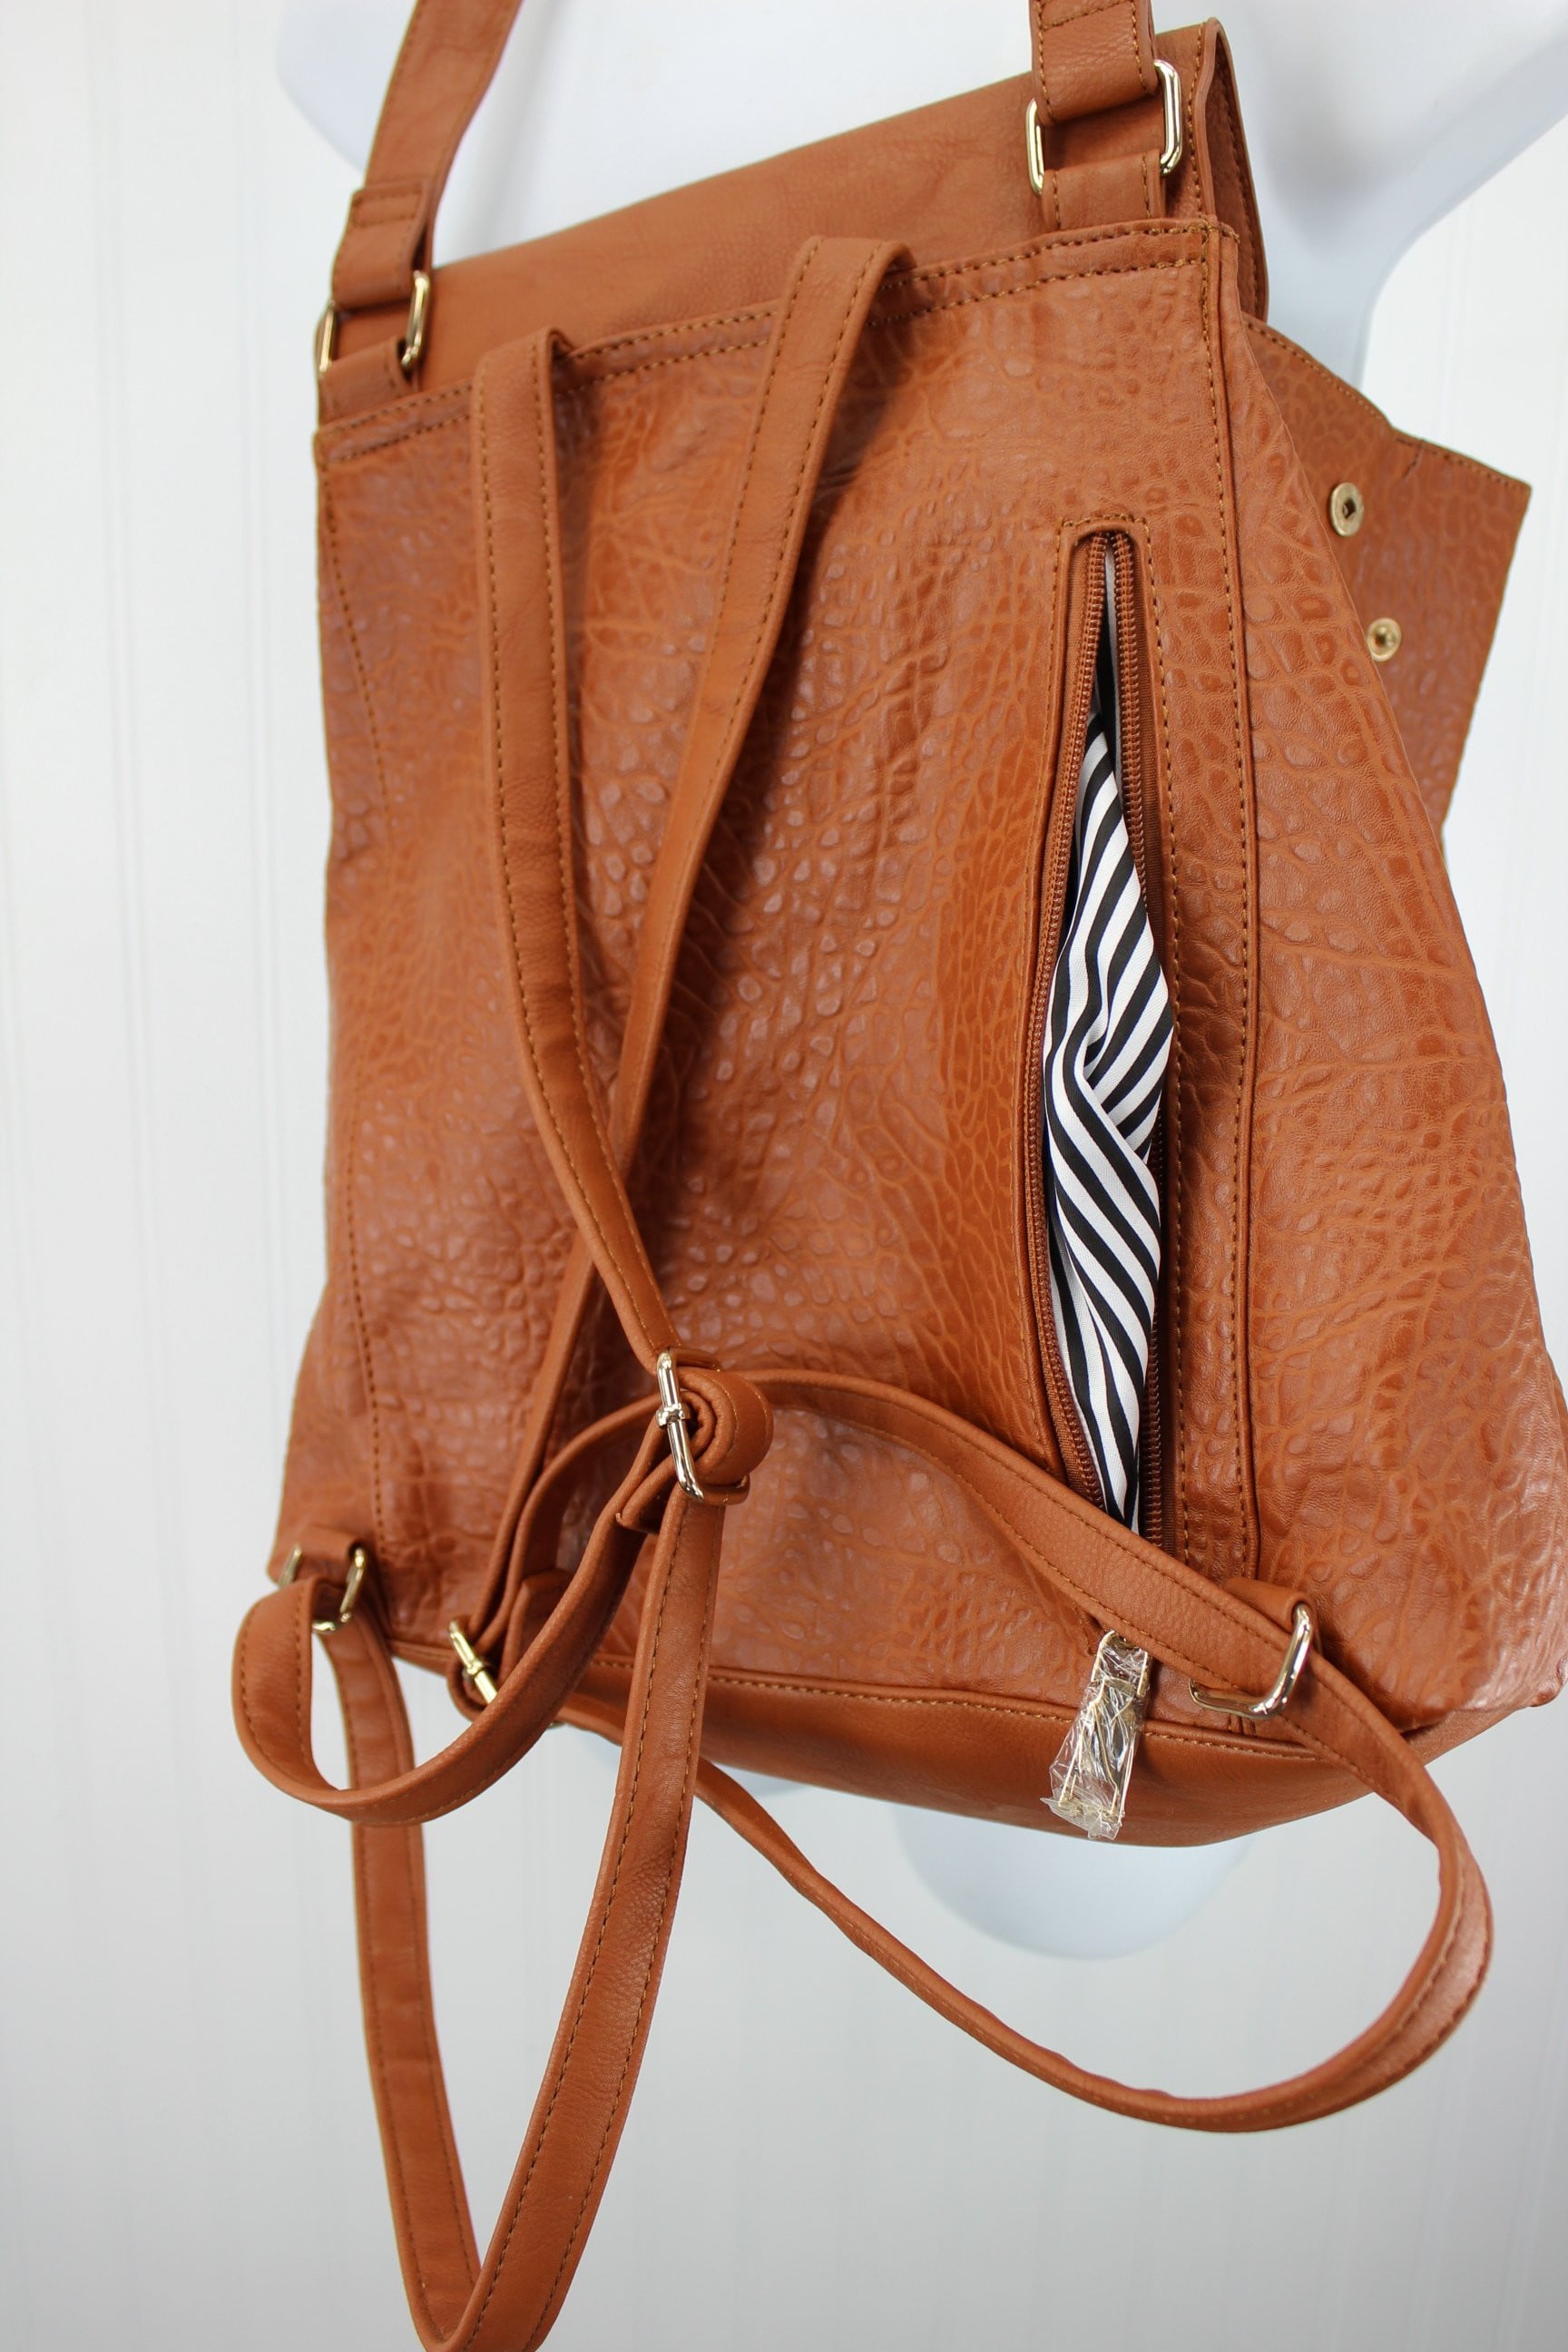 Expressions NYC Shoulder Bag Backpack Caramel Textured Faux  Leather Appears Unused stripe lining